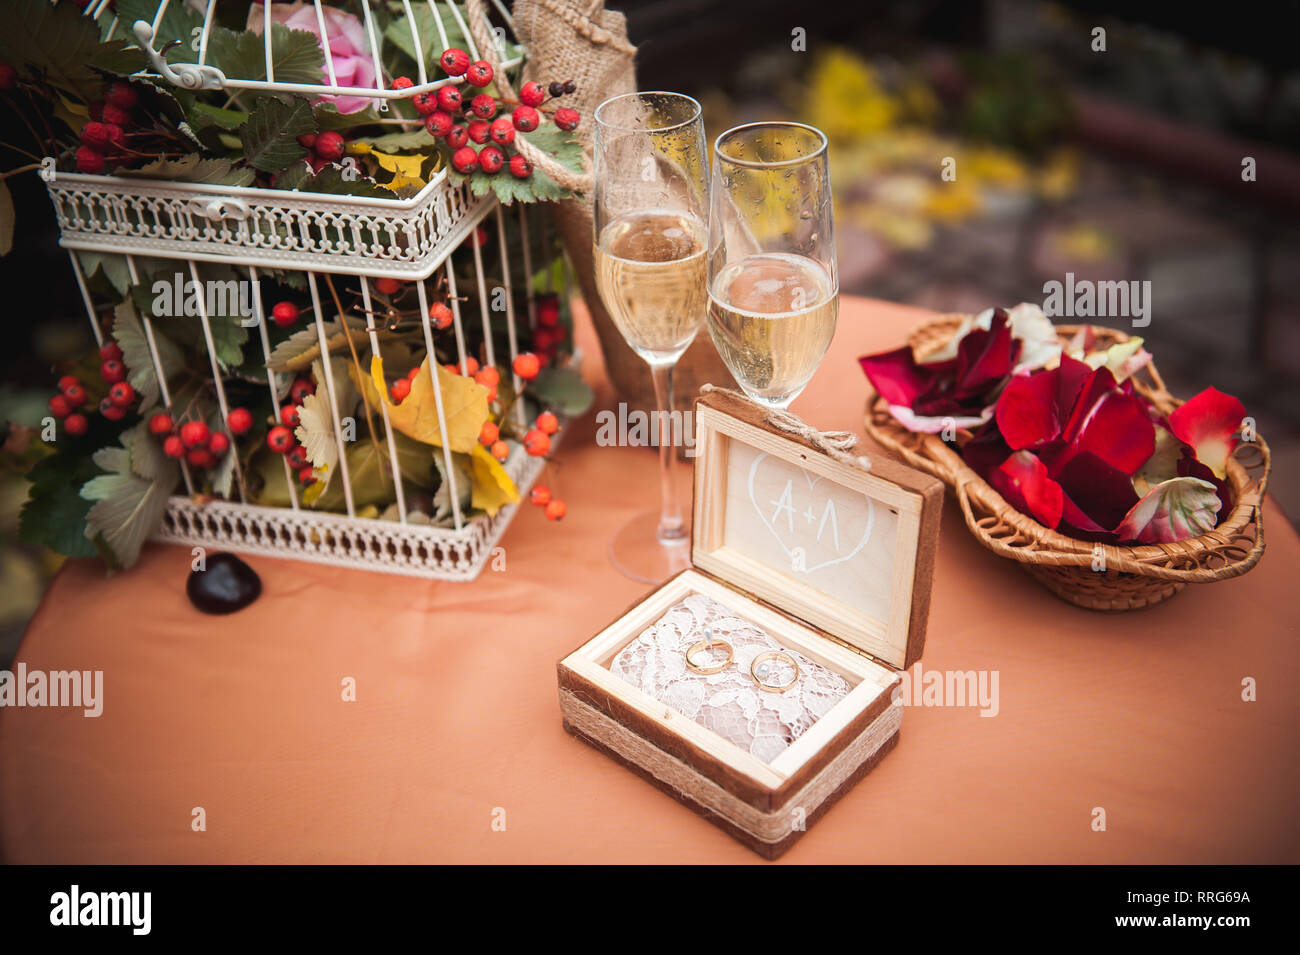 Creative Ideas - Amazing Ideas For Engagement Ring Tray... | Facebook